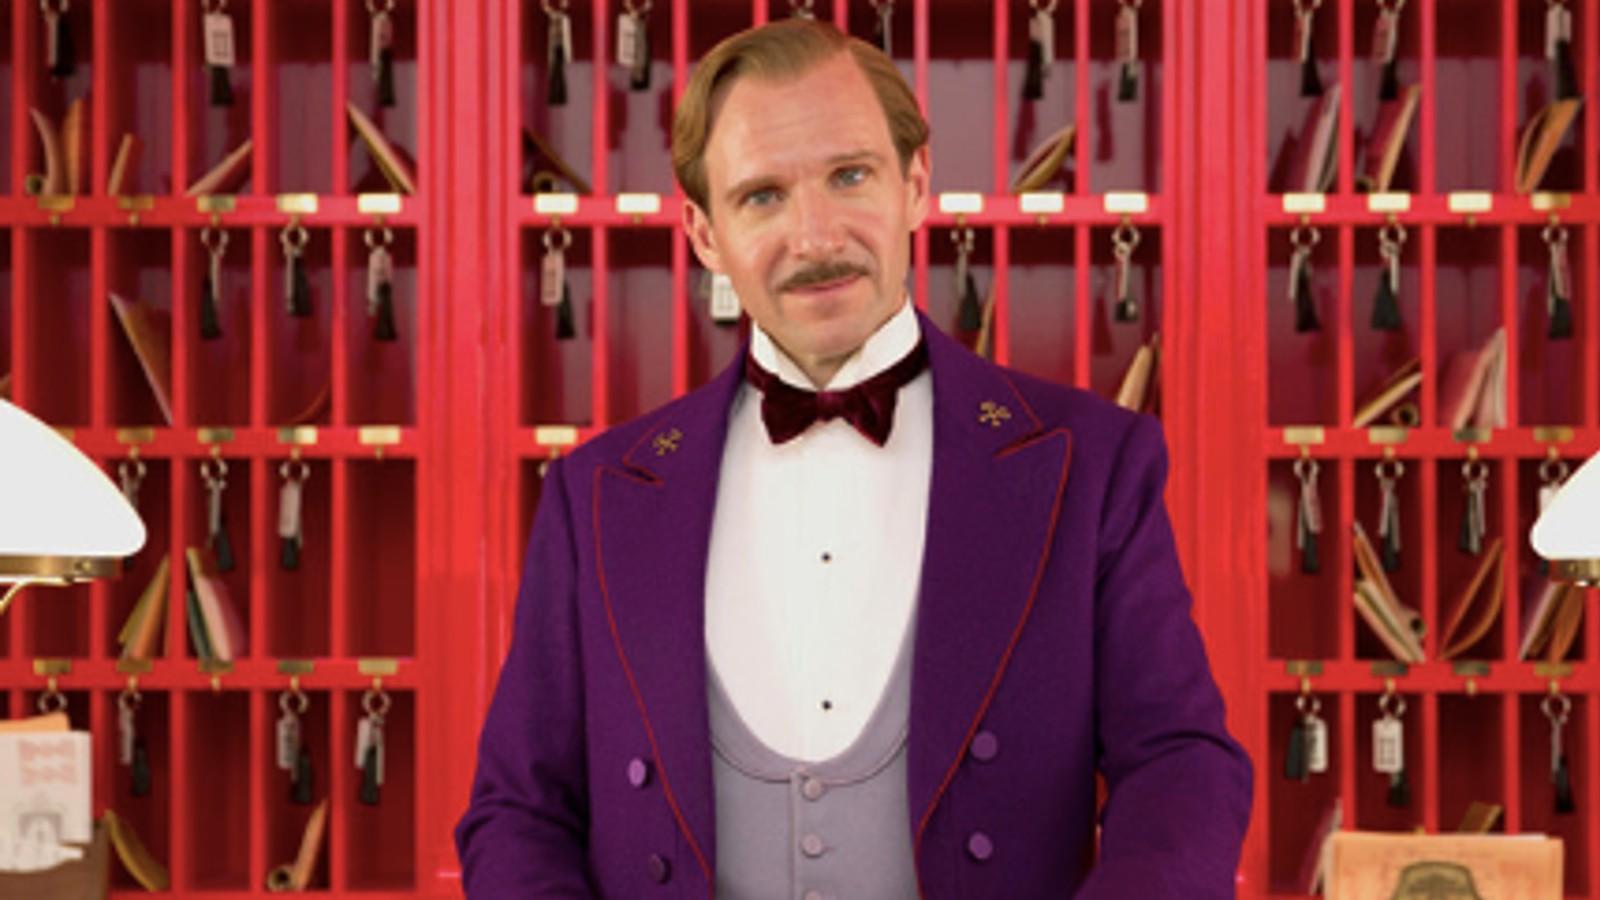 Ralph Fiennes in the film The Grand Budapest Hotel